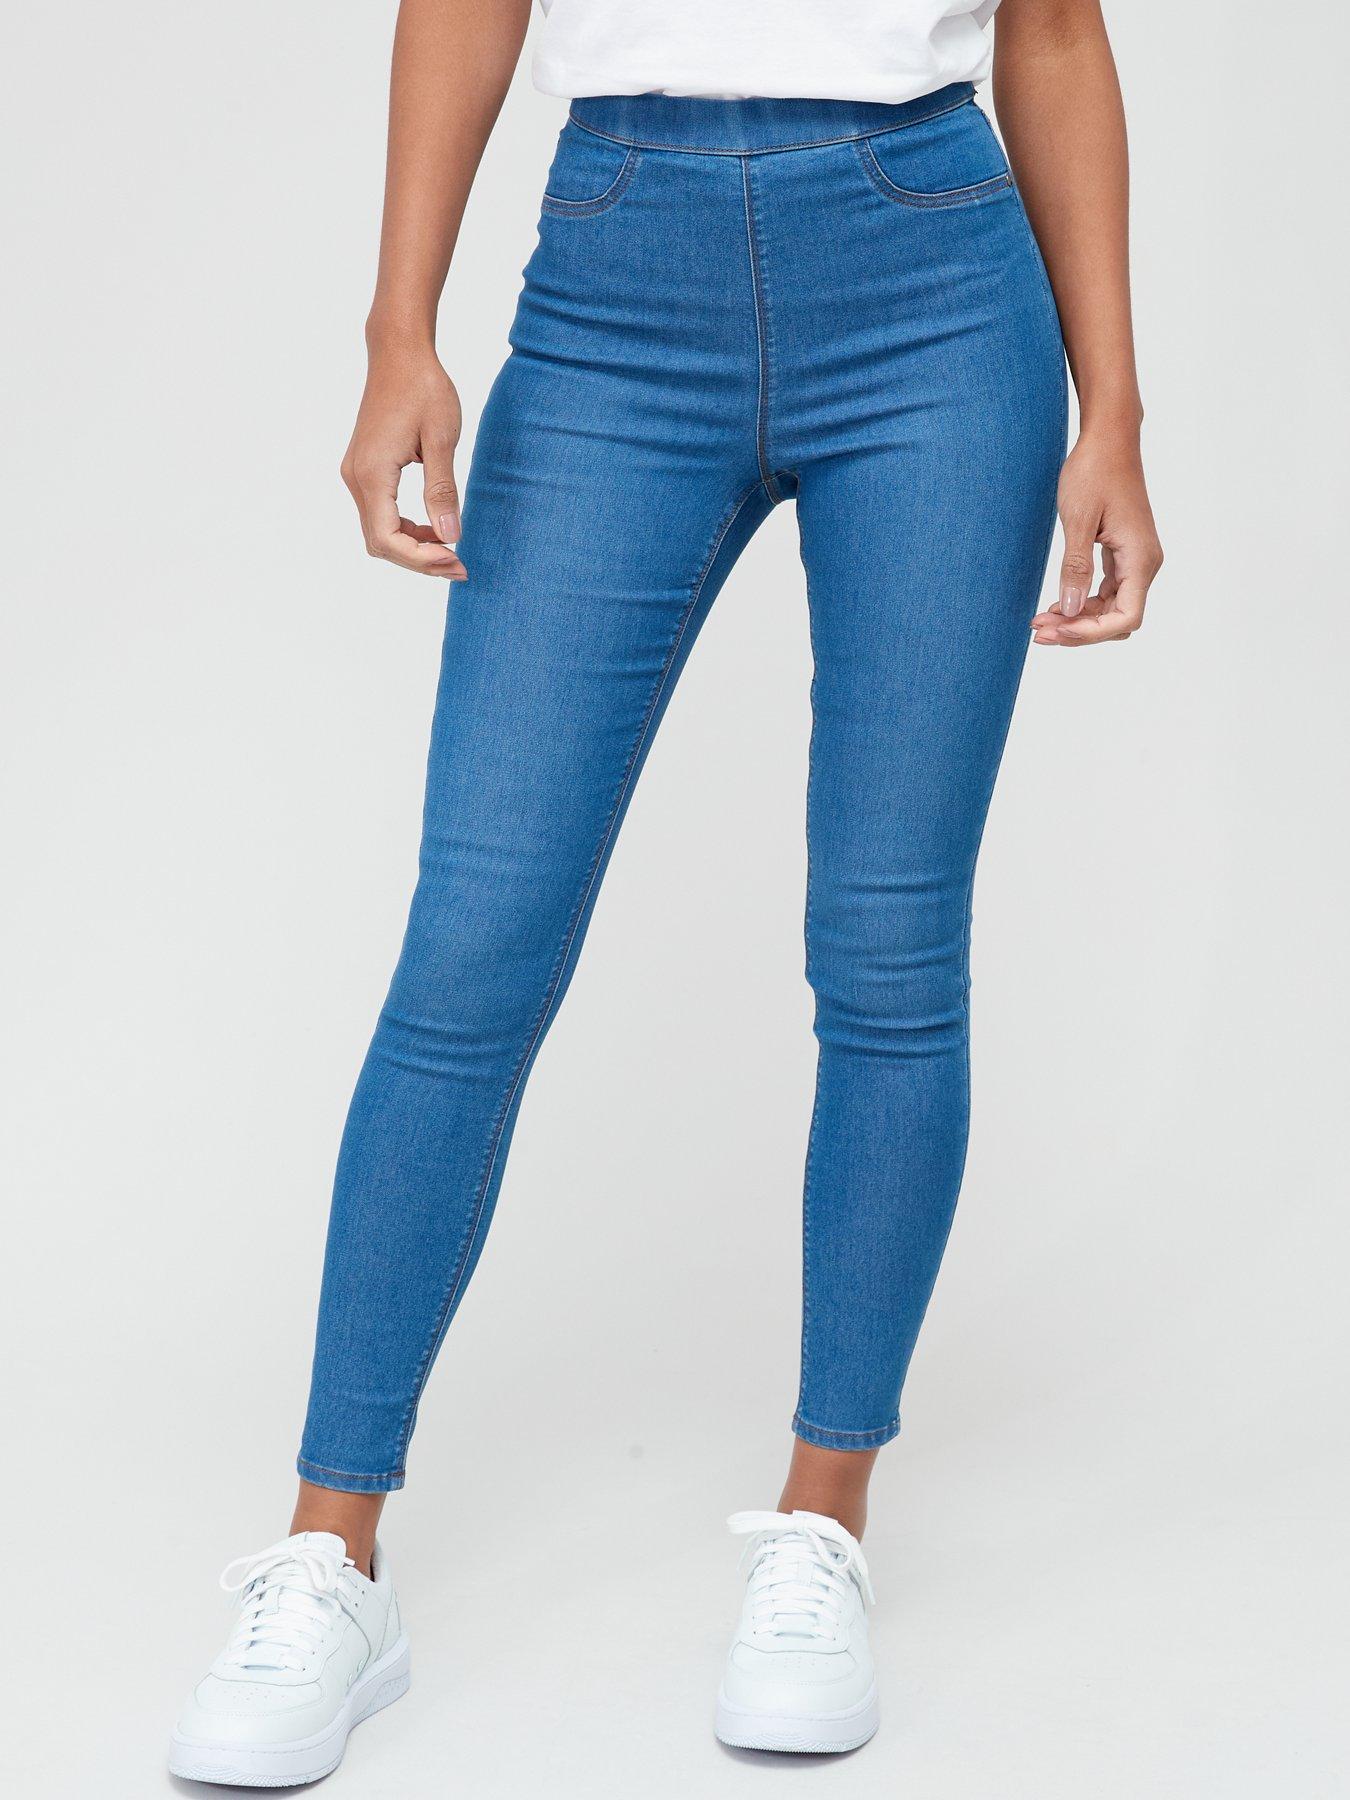 Jeggings with Zip Fly